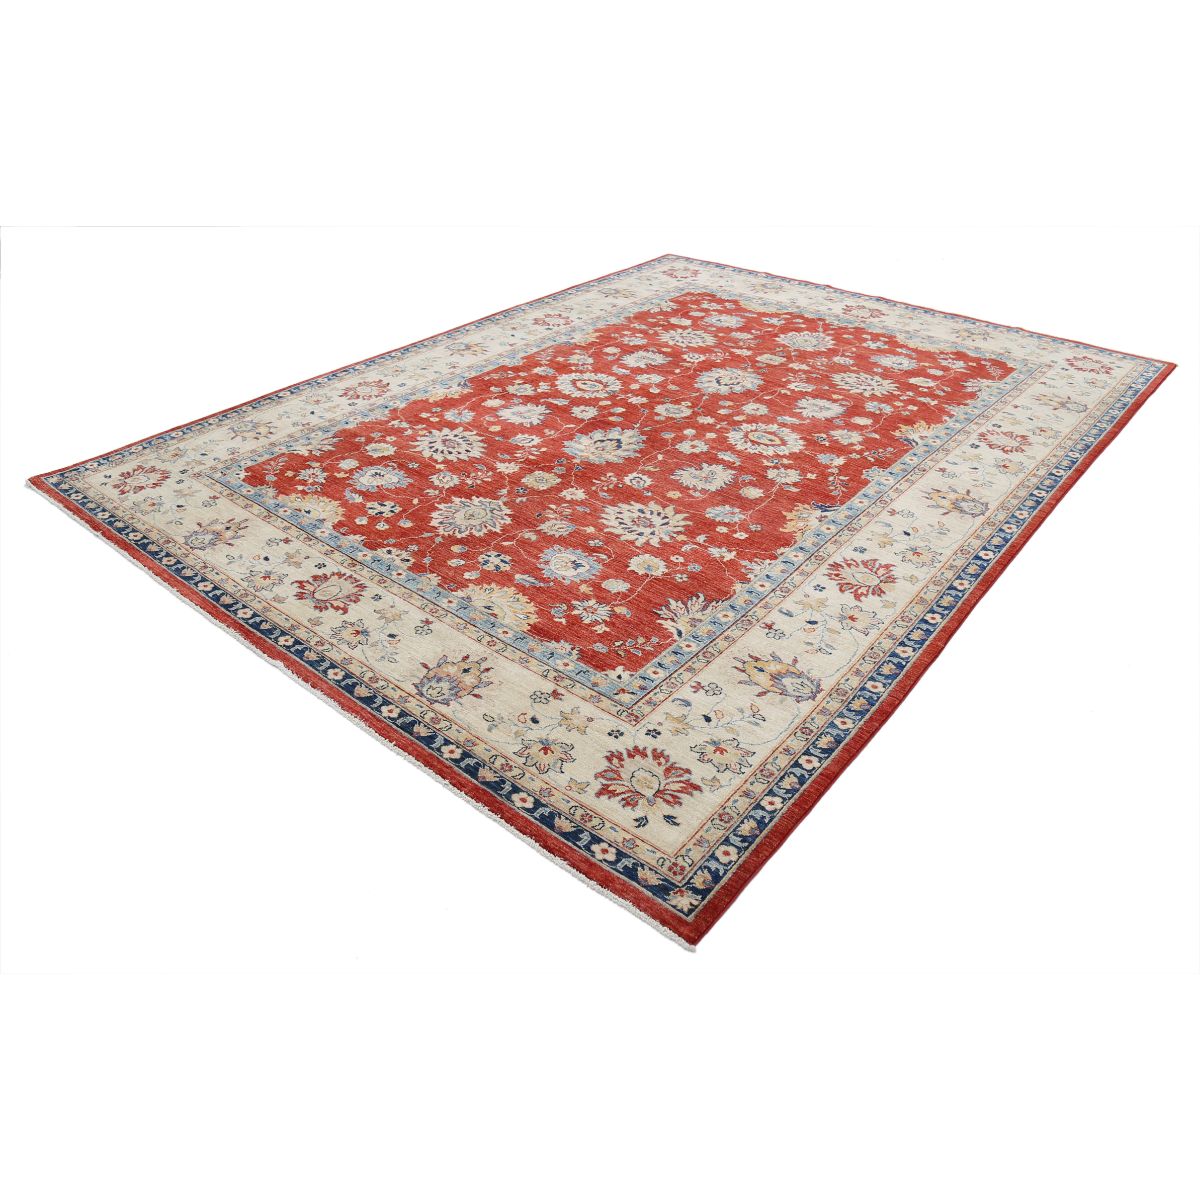 Ziegler 8'10" X 11'8" Wool Hand-Knotted Rug